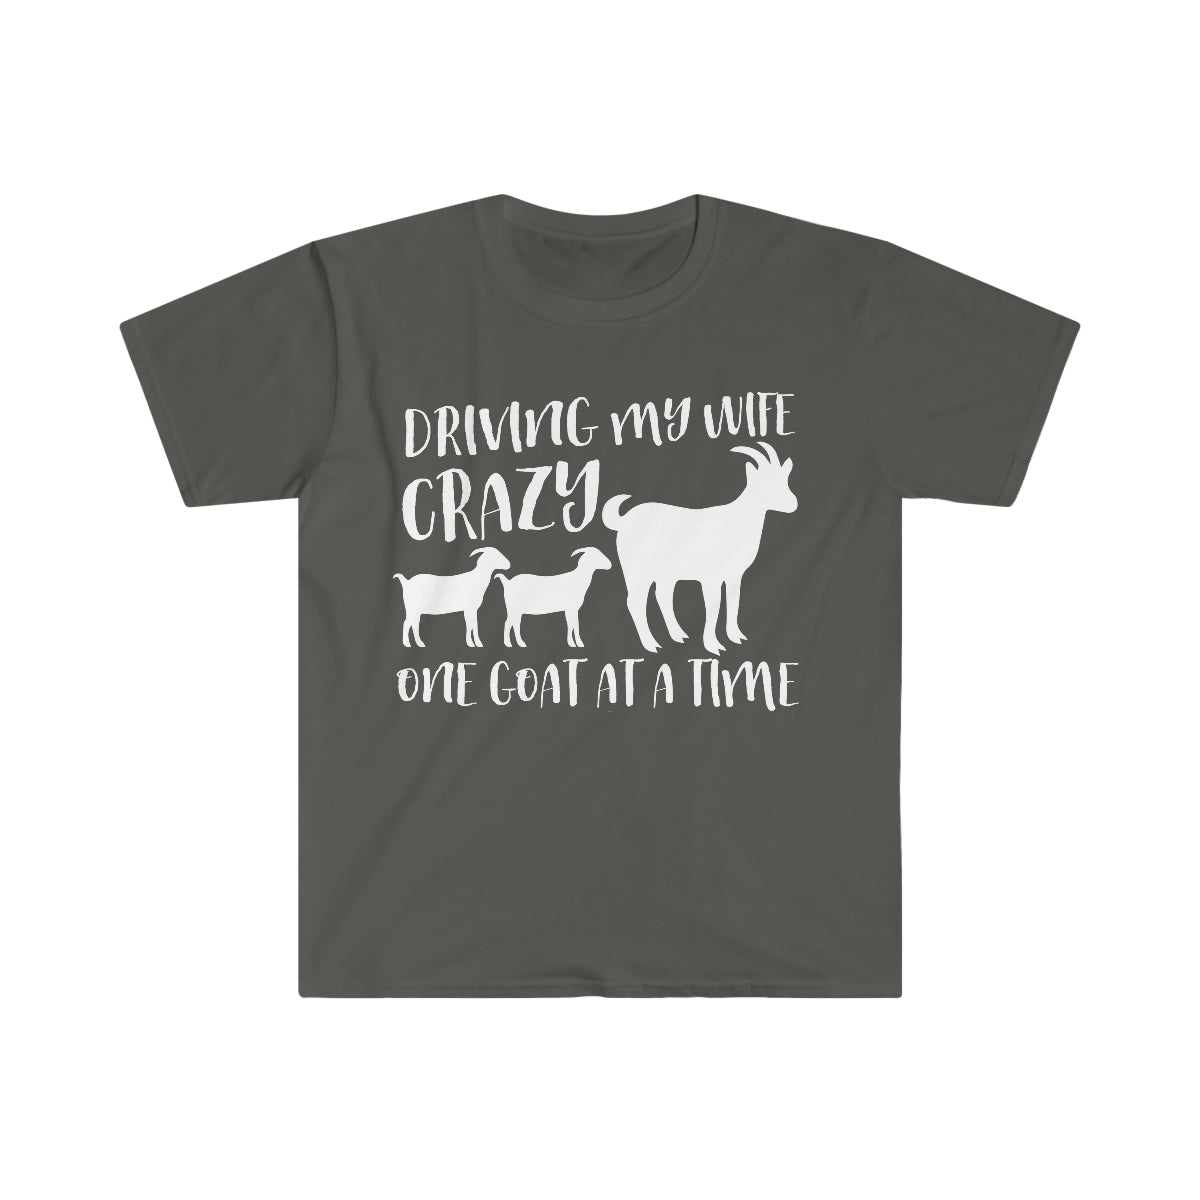 *Driving My Wife Crazy One Goat at a Time* Unisex Softstyle T-Shirt